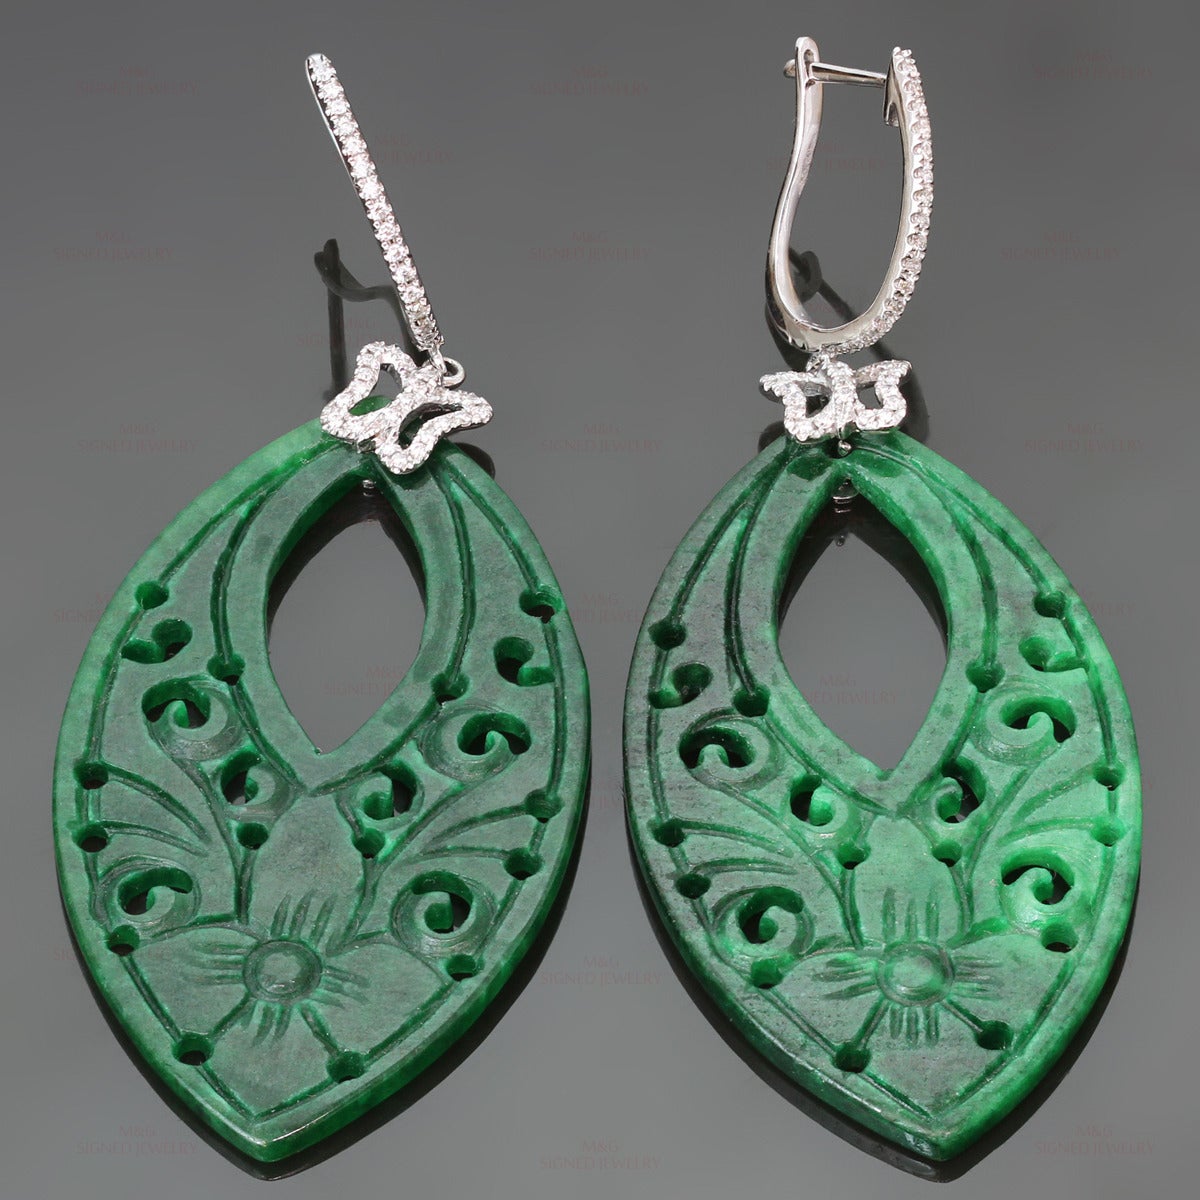 These fabulous 18k white gold pendant earrings feature beautifully carved green jade drops accented with sparkling butterflies set with 76 G-H VS1-VS2 diamonds of an estimated 0.55 carats. Jade has not been checked for treatment. Measurements: 1.06